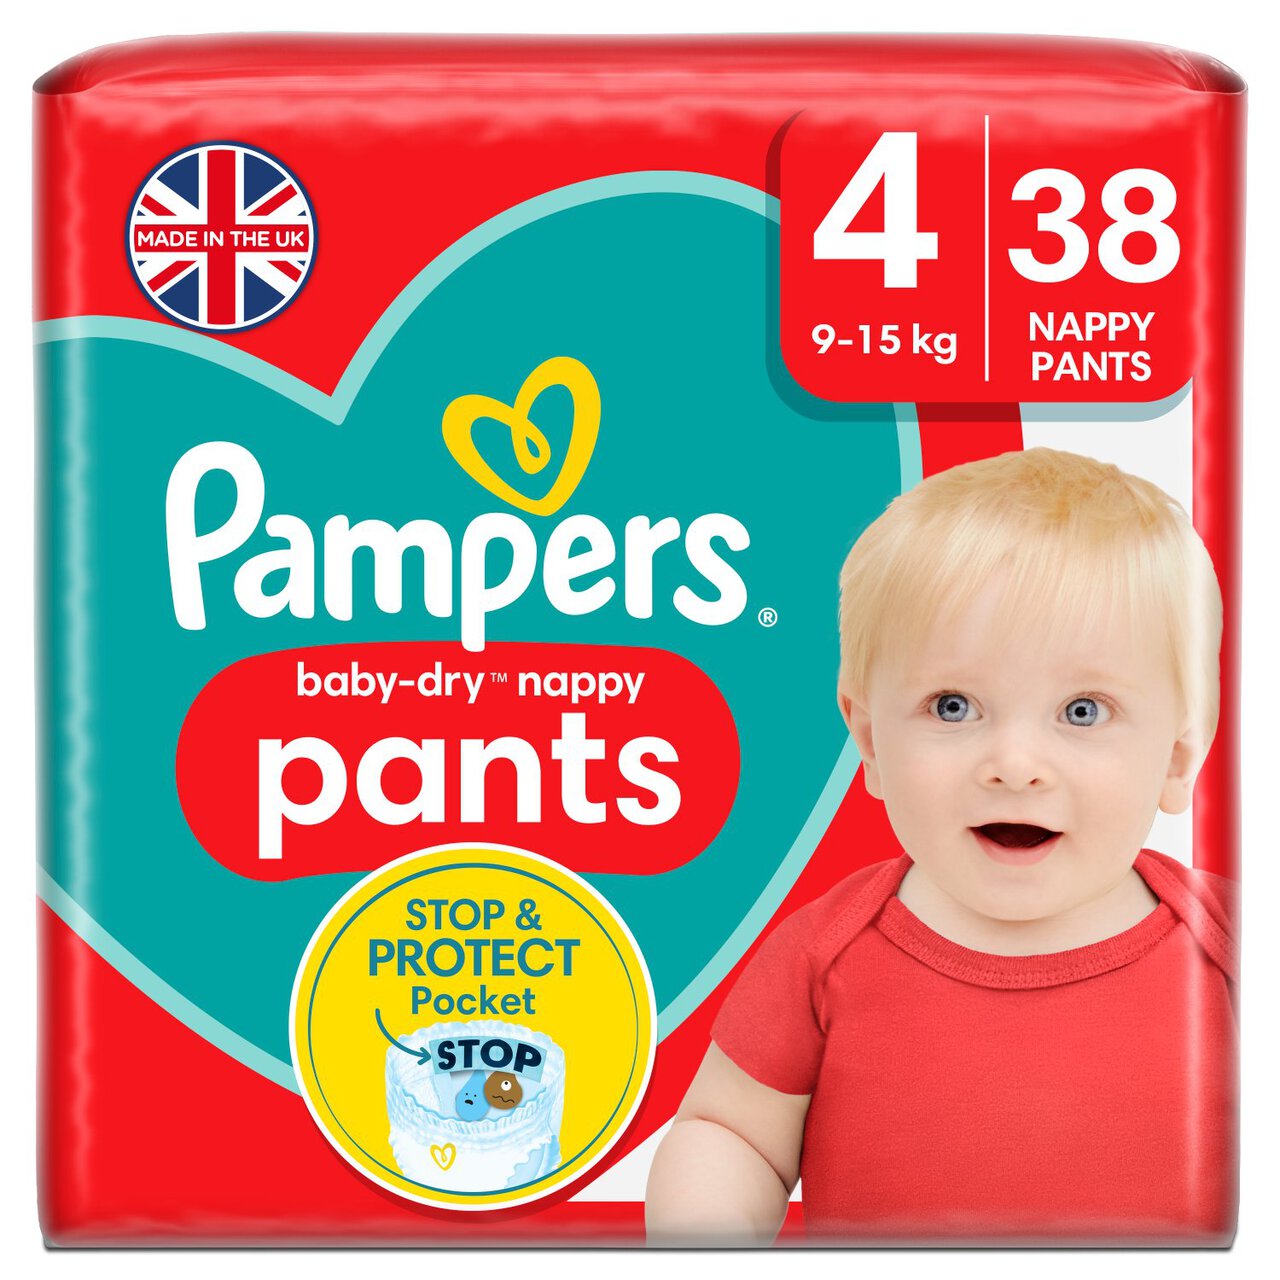 Pampers Baby-Dry Nappy Pants, Size 4 (9-15kg) Essential Pack 38